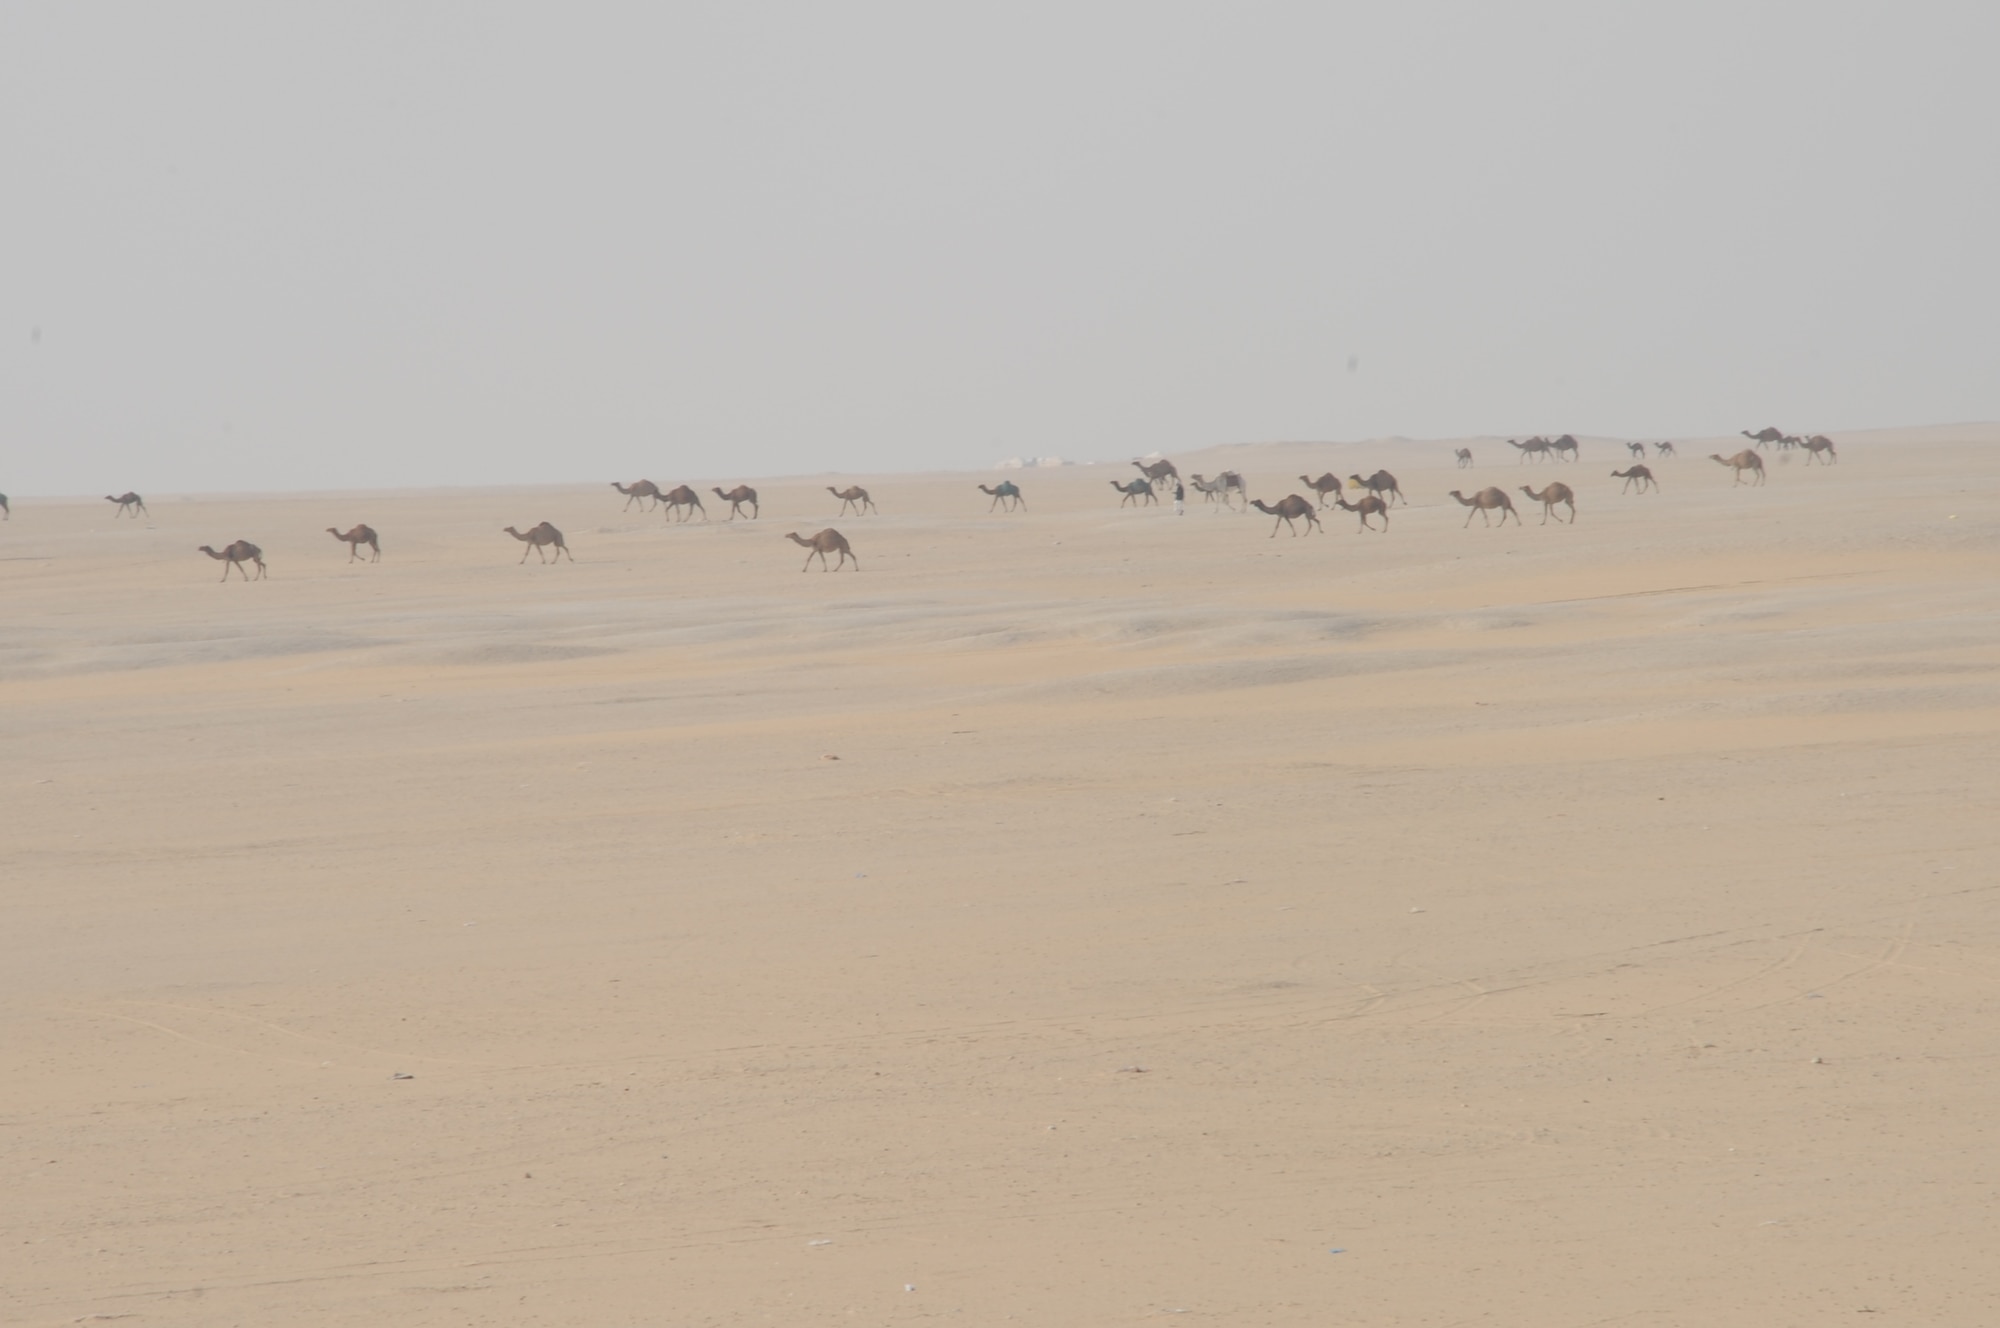 Camels graze in the desert lands that surround the base in an undisclosed location in Southwest Asia Jan. 1, 2016. The 386th Expeditionary Security Forces Squadron base security zone patrol is responsible for safeguarding the security zones on the perimeter. (U.S. Air Force photo/Tech. Sgt. Kenneth McCann)